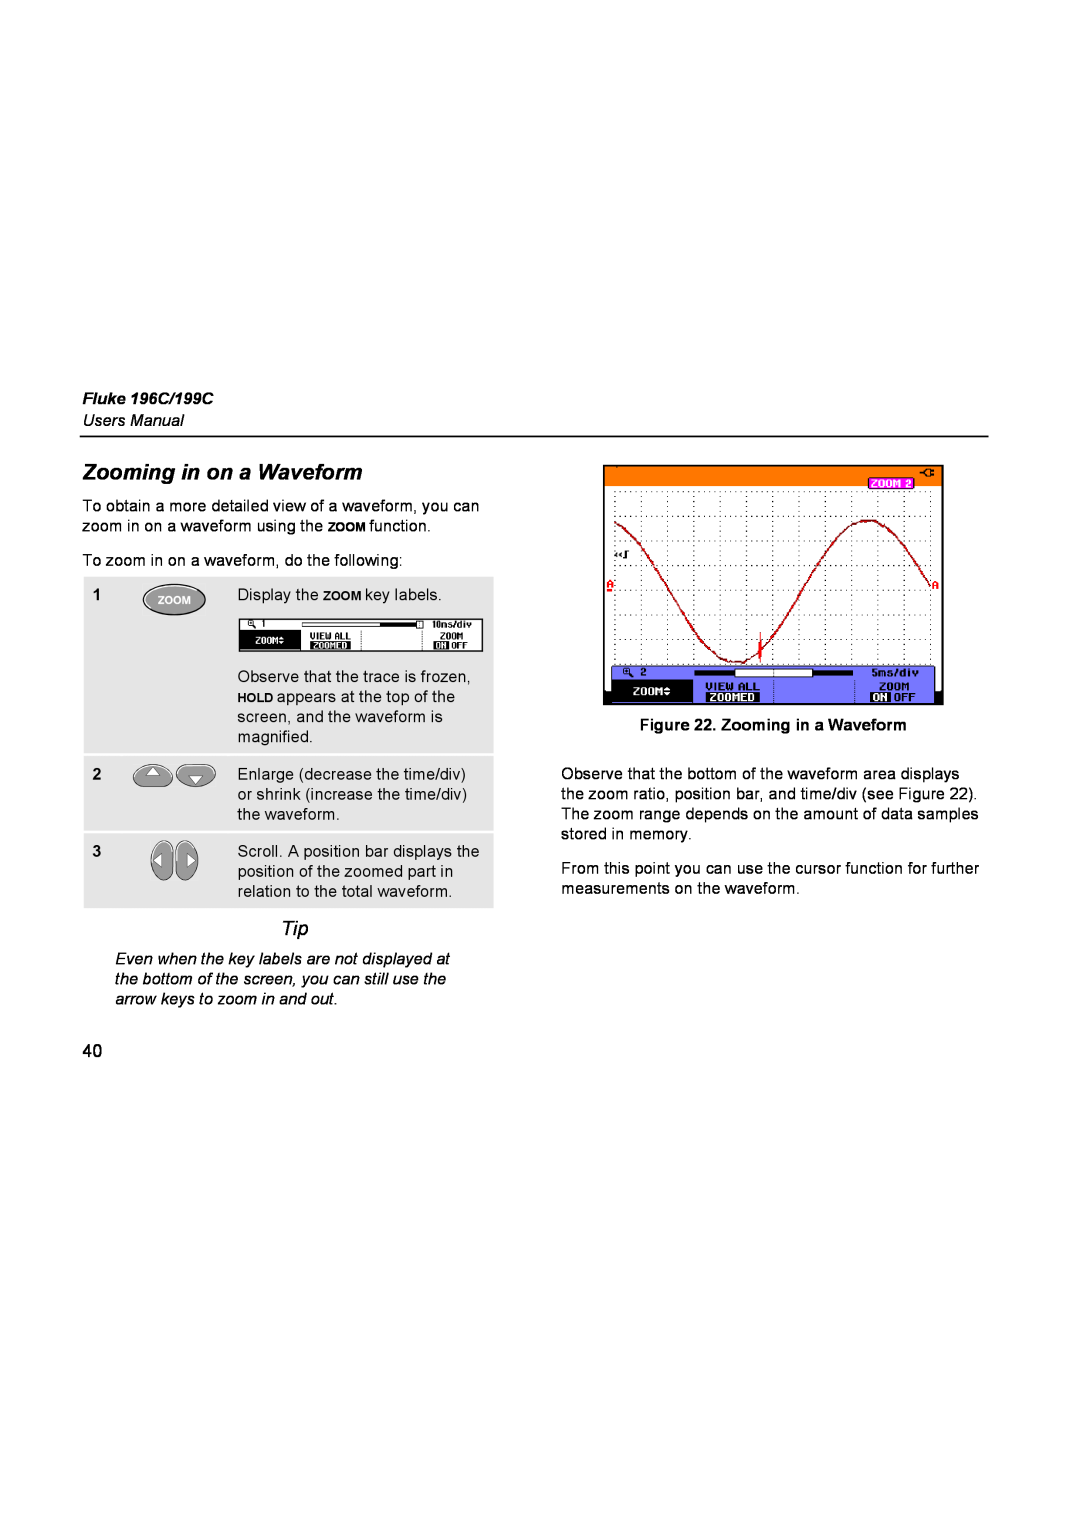 Fluke user manual Zooming in on a Waveform, Zooming in a Waveform, Fluke 196C/199C 